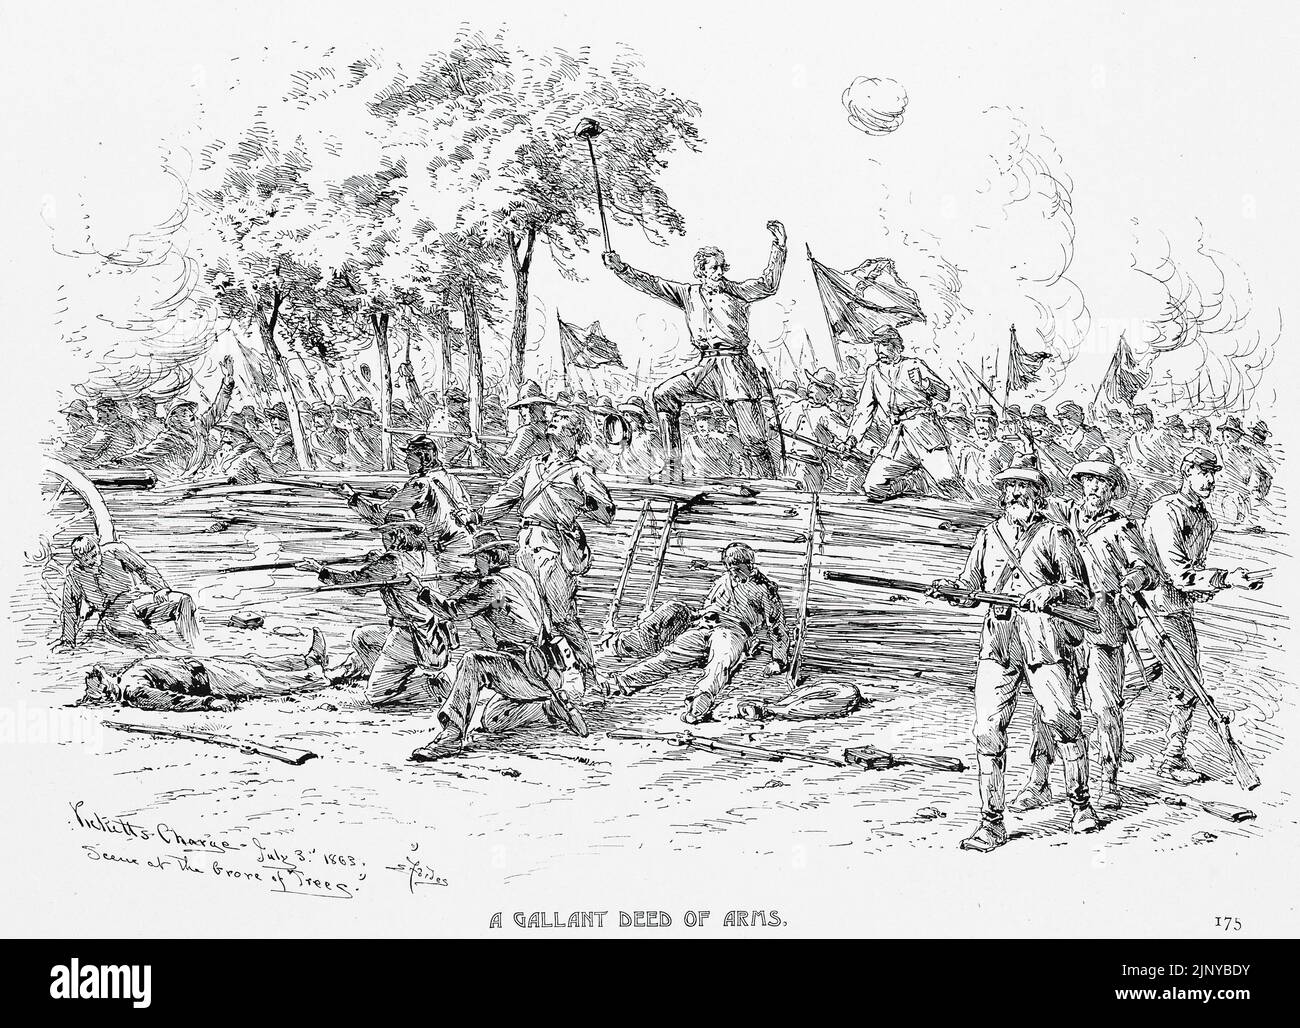 A Gallant Deed of Arms - Pickett's Charge, July 3rd, 1863, Scene of the Grove of Trees. Battle of Gettysburg. 19th century American Civil War illustration by Edwin Forbes Stock Photo